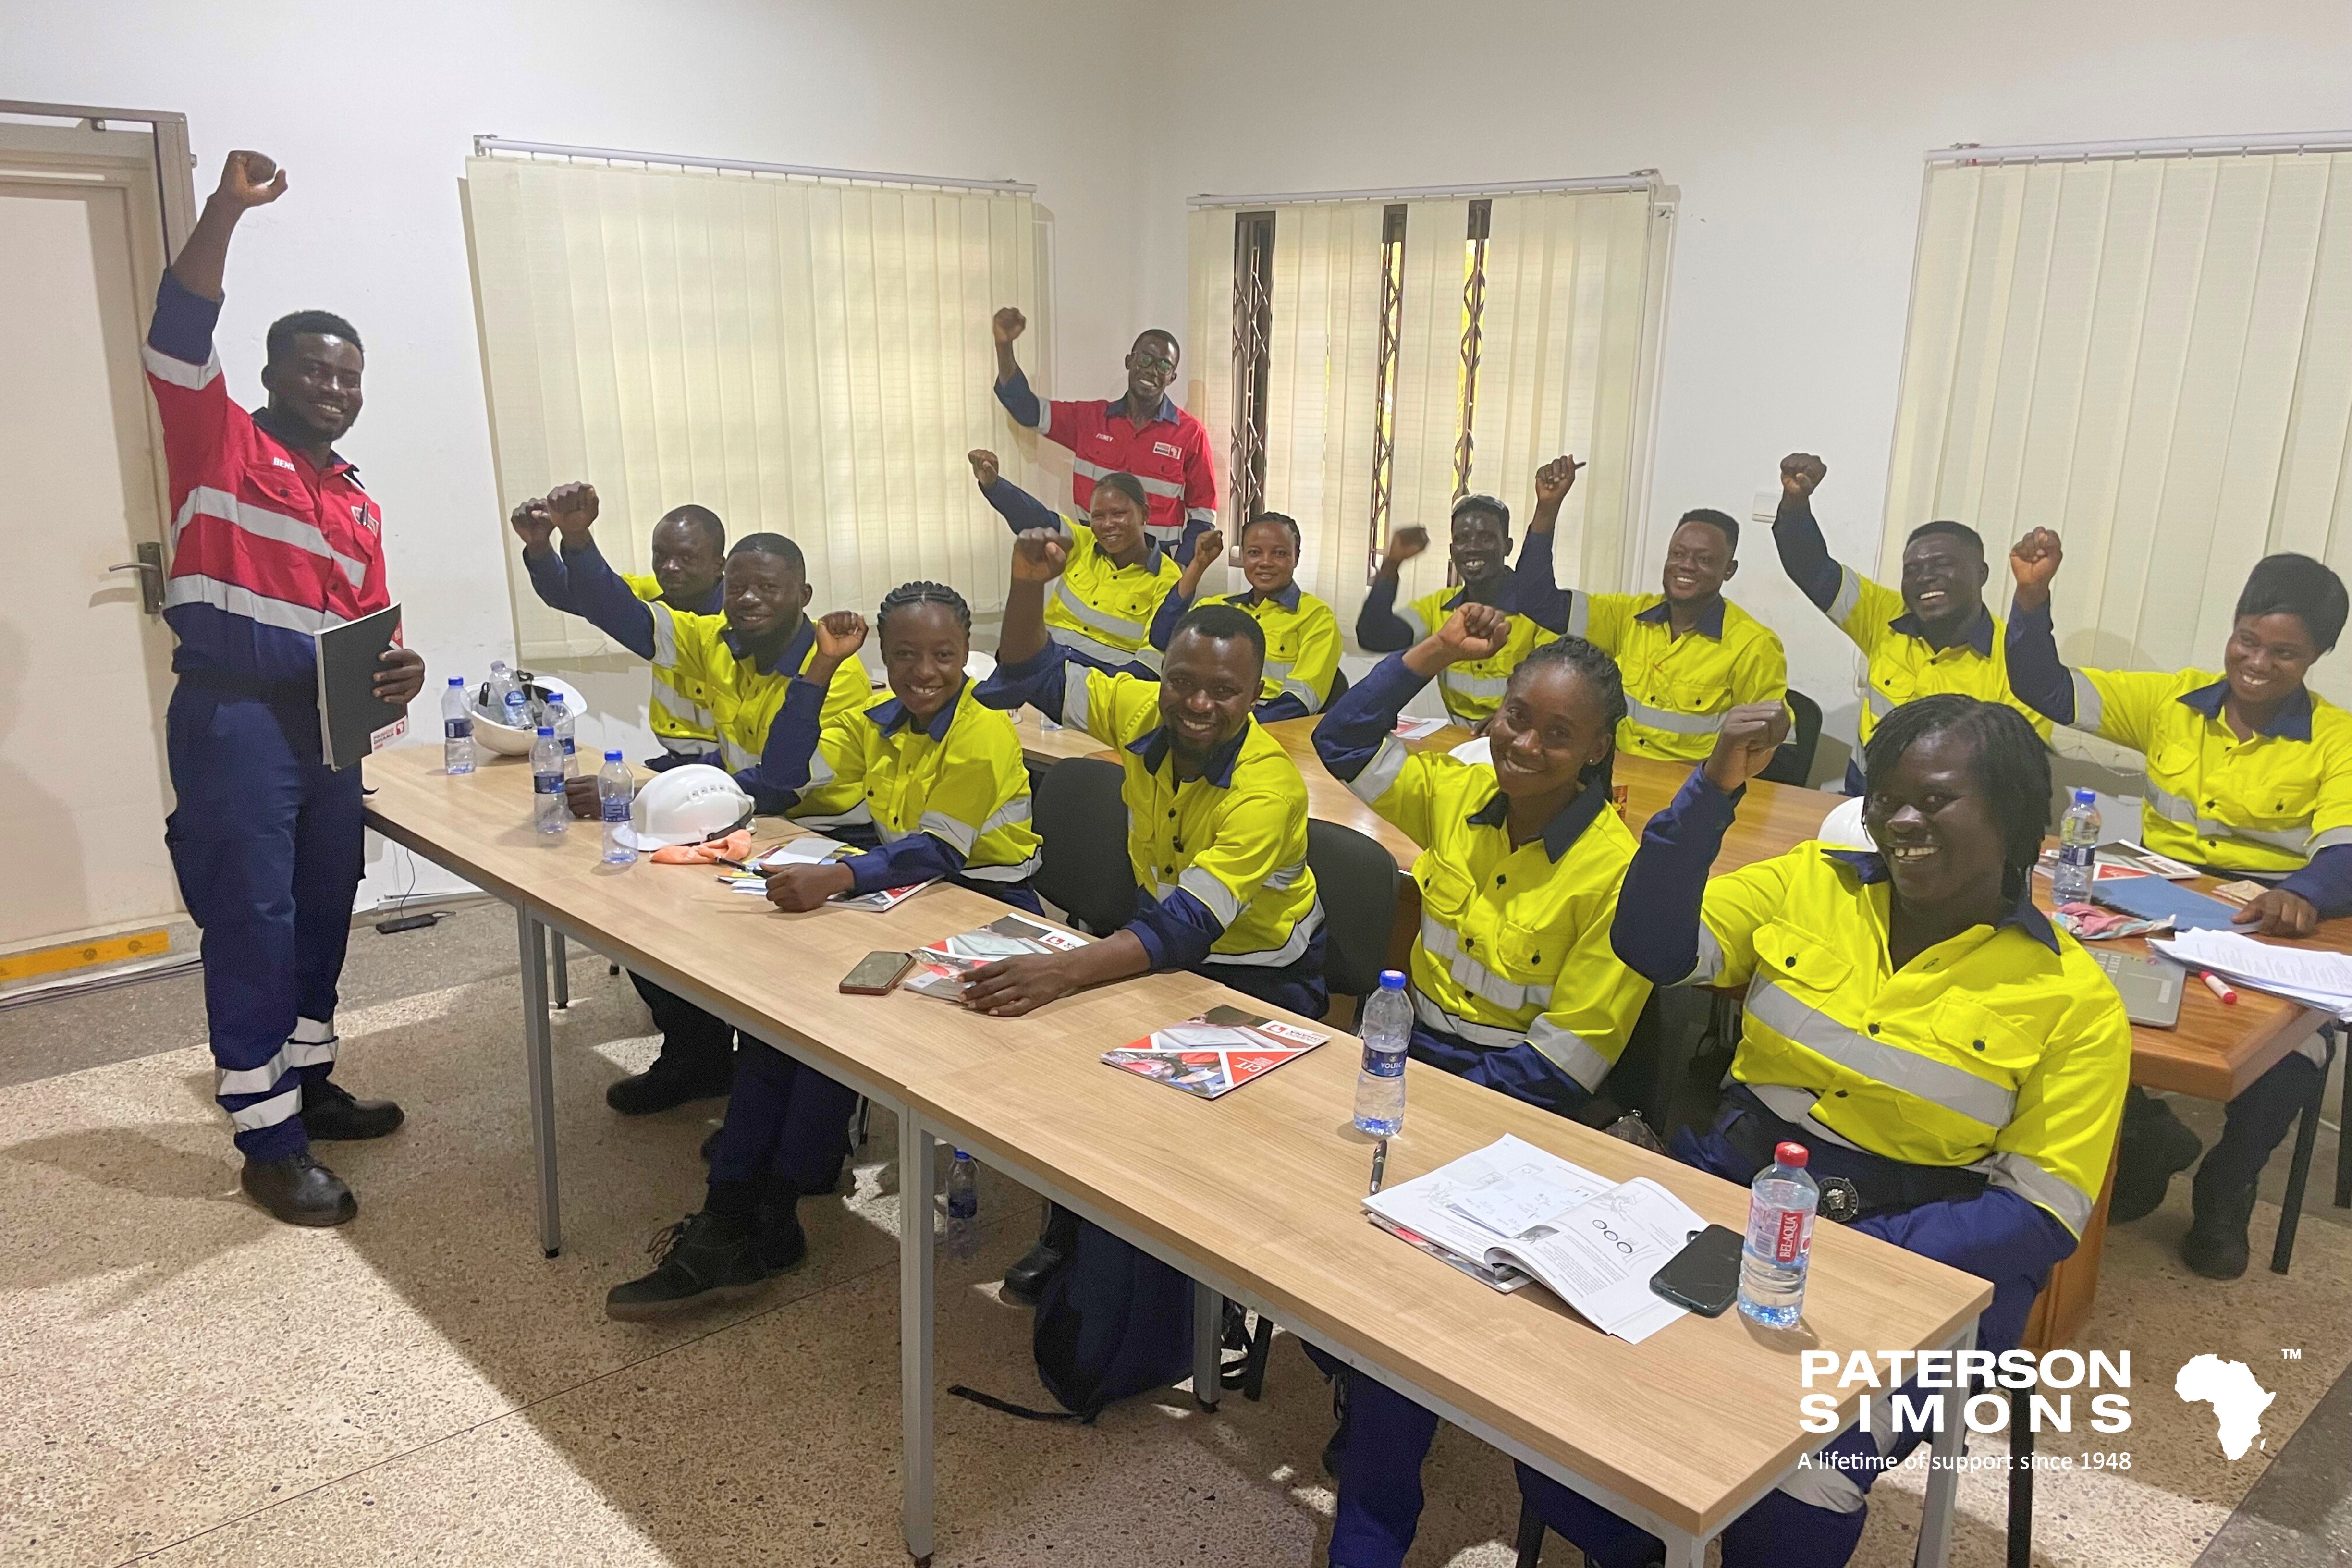 PATERSON SIMONS GROUP CONDUCTS TRAINING FOR NEWMONT AHAFO NORTH COMMUNITY MEMBERS, AT OUR TAKORADI TRAINING CENTRE